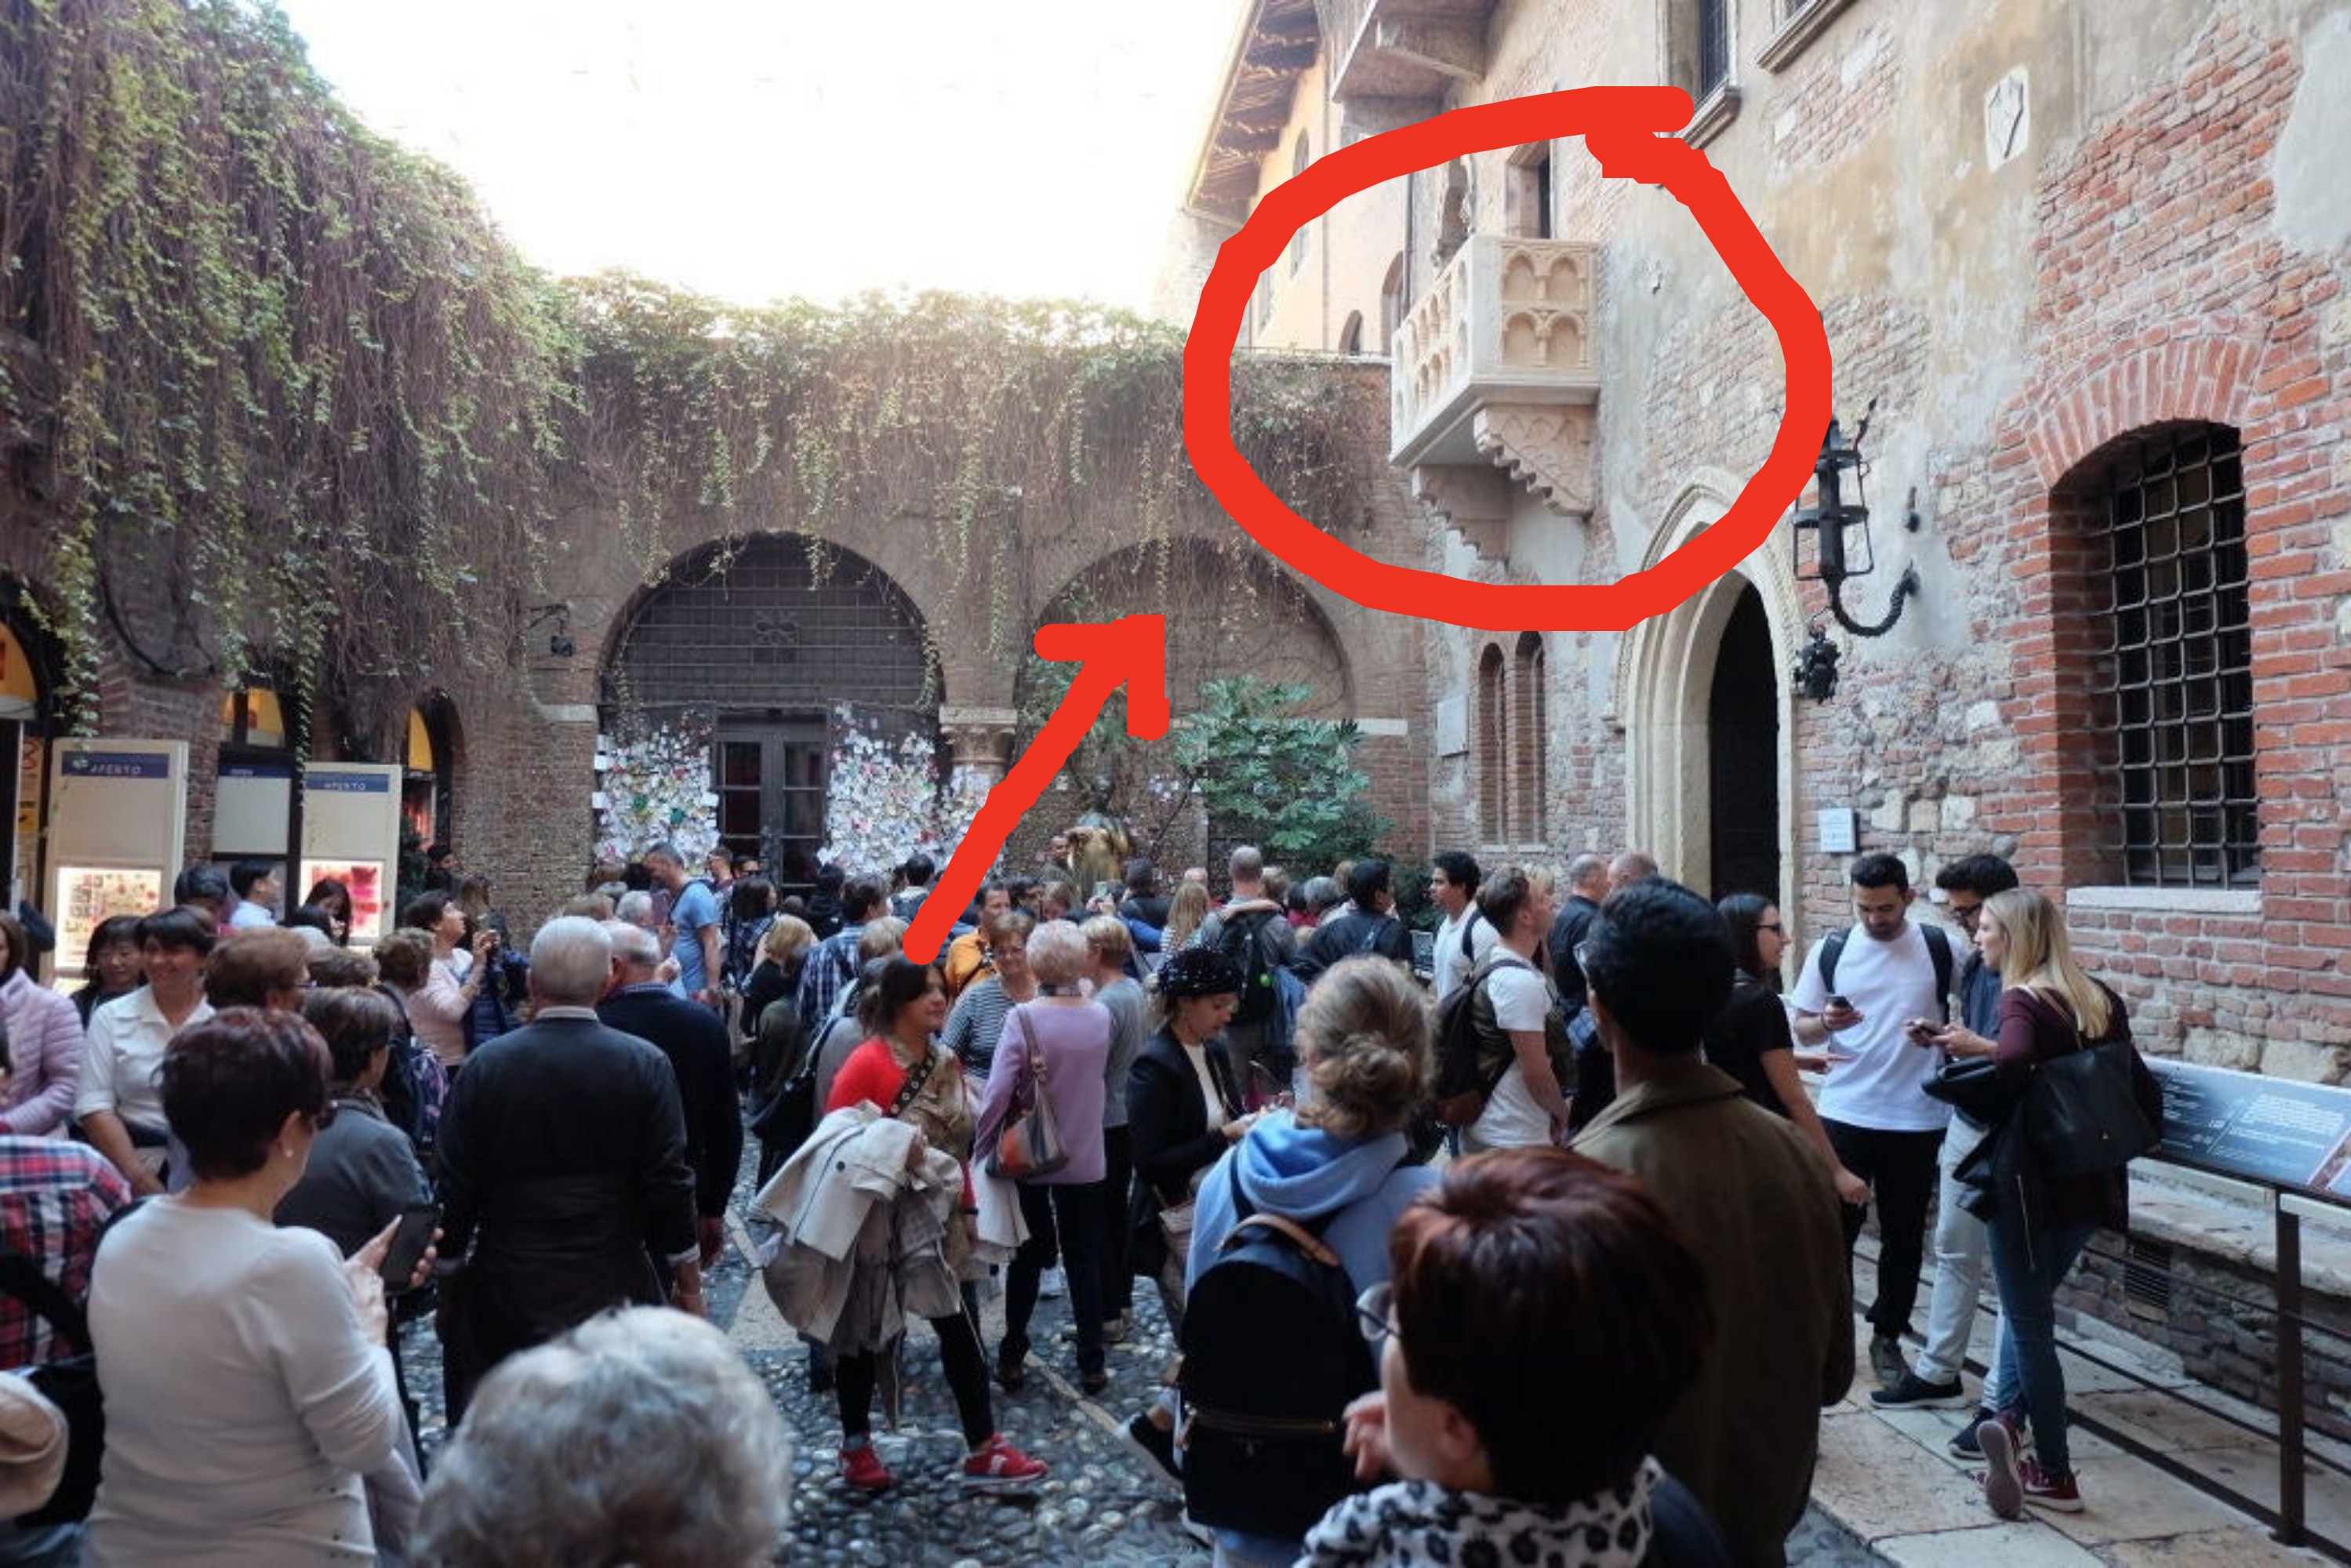 A crowd of tourists underneath the balcony in Verona